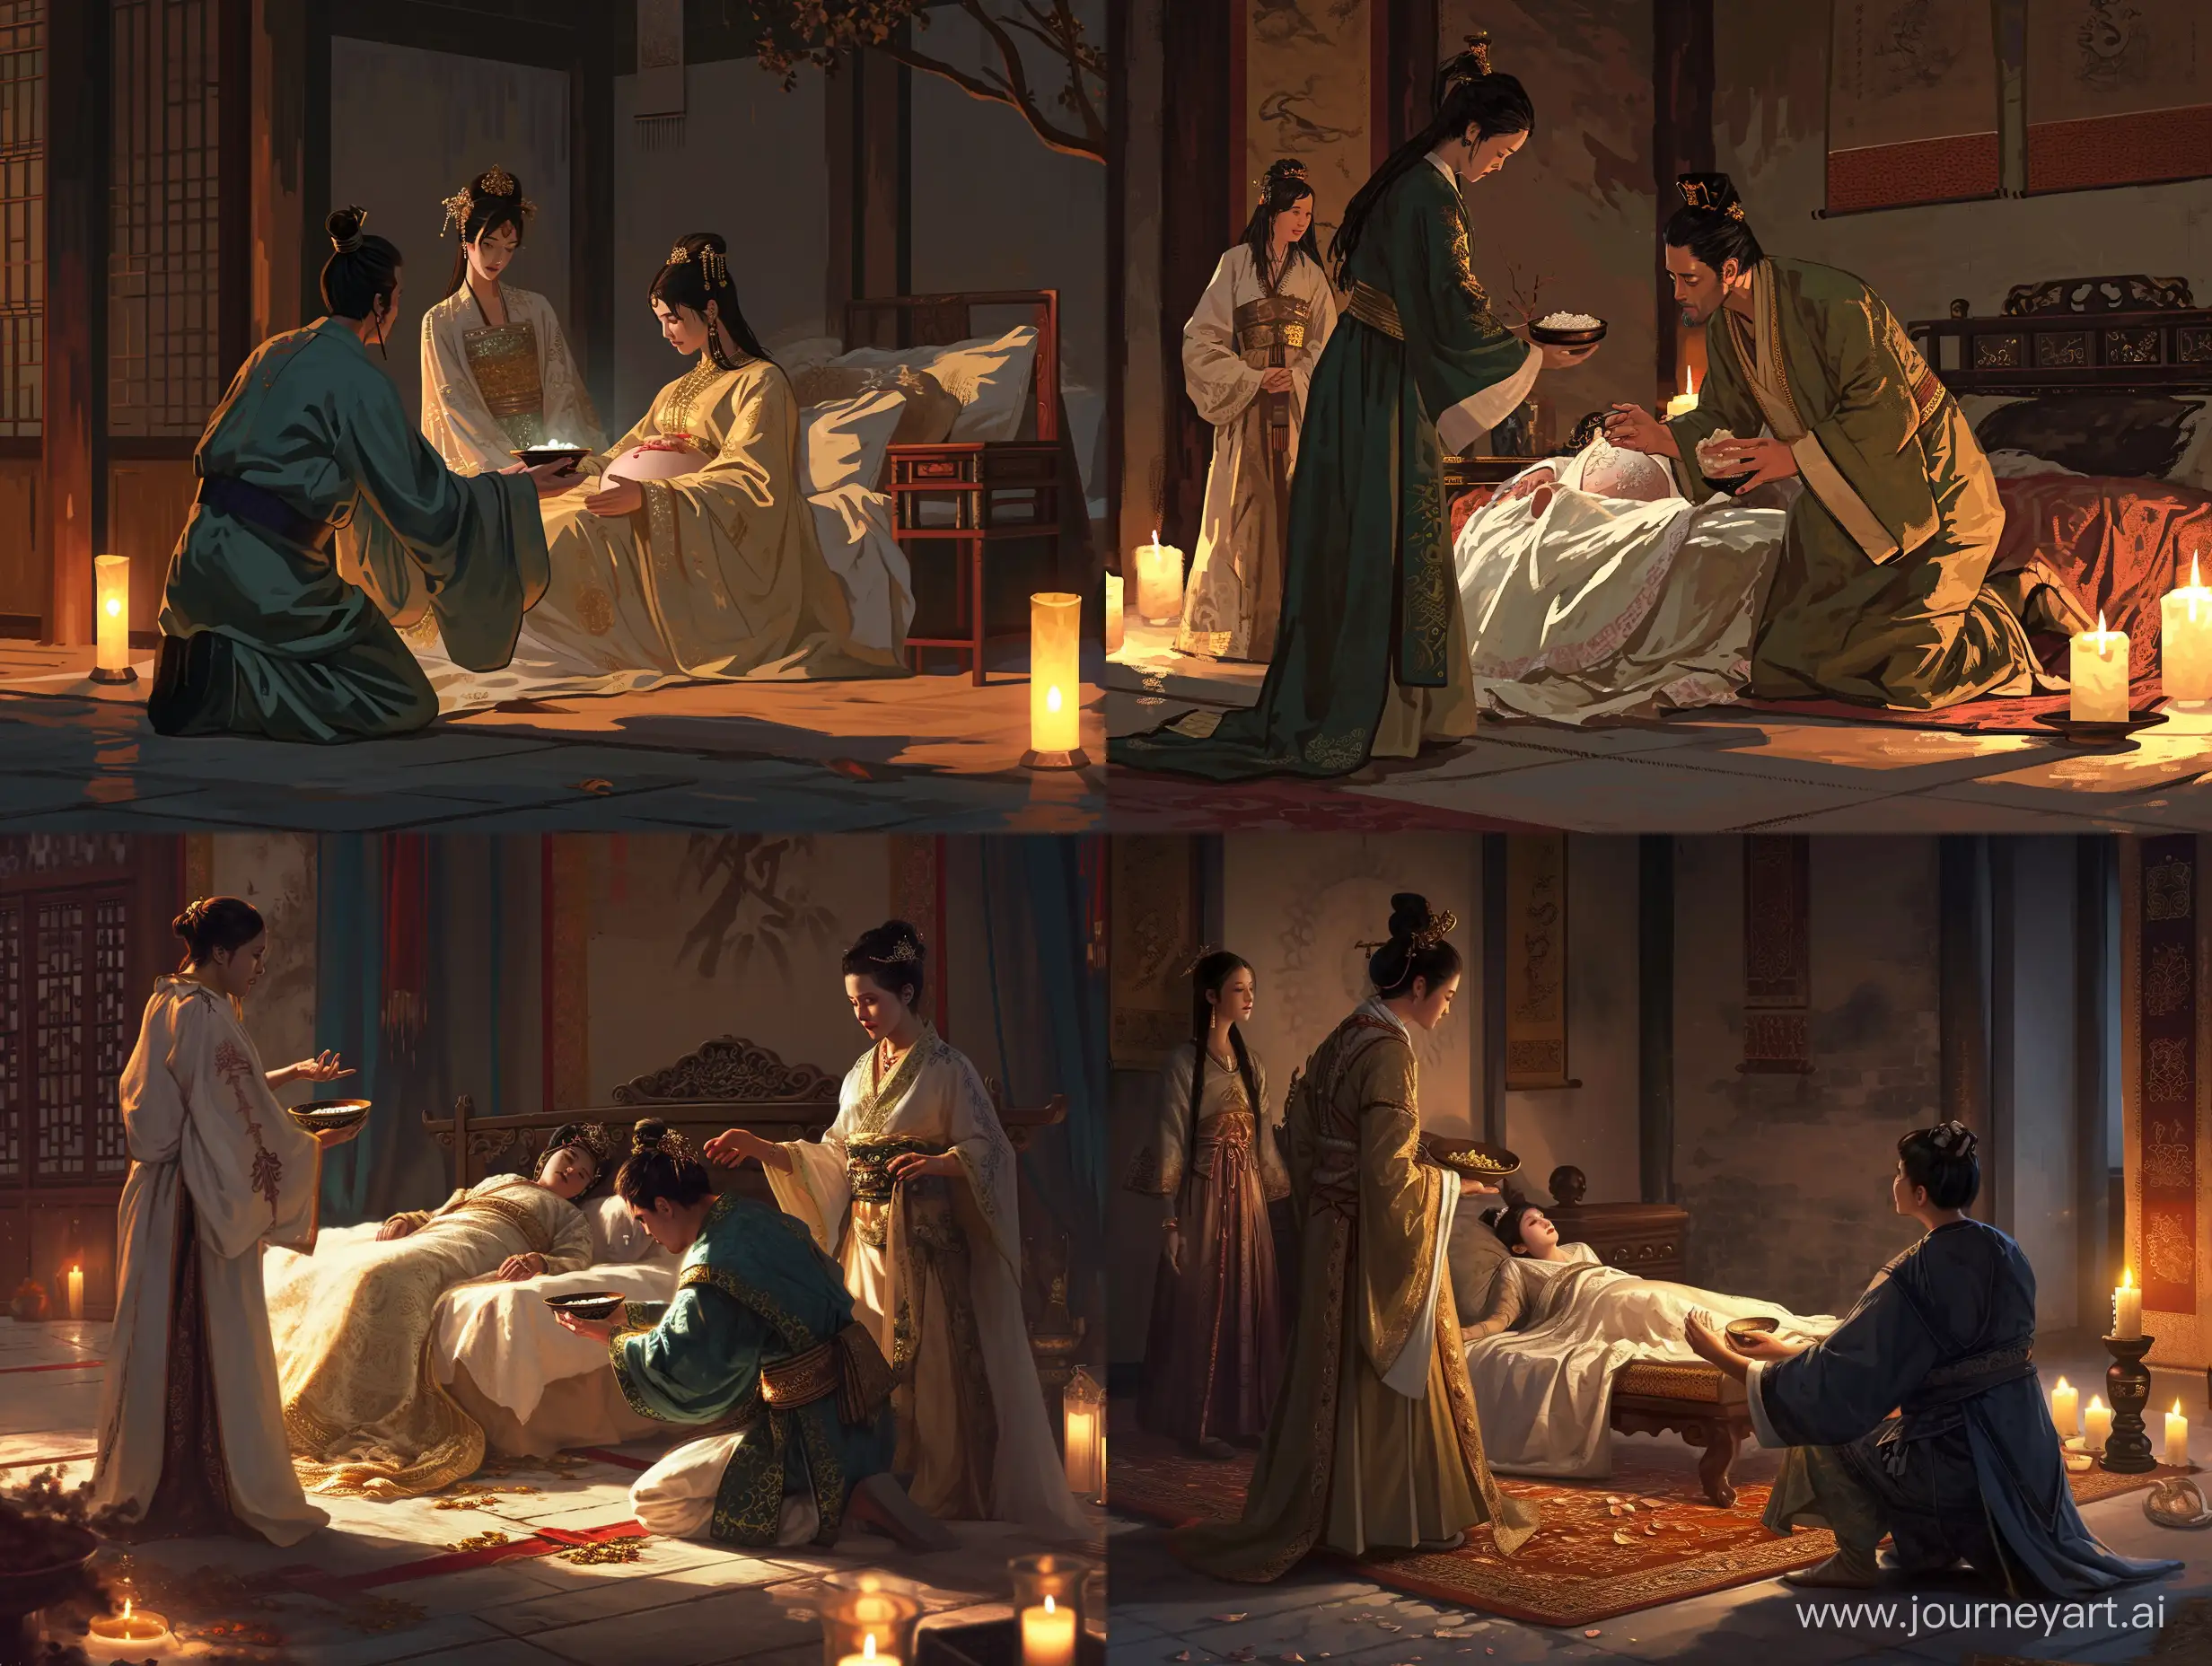 Royal-Physician-Offering-Medicine-to-Pregnant-Queen-in-Luxurious-Eastern-Aesthetics